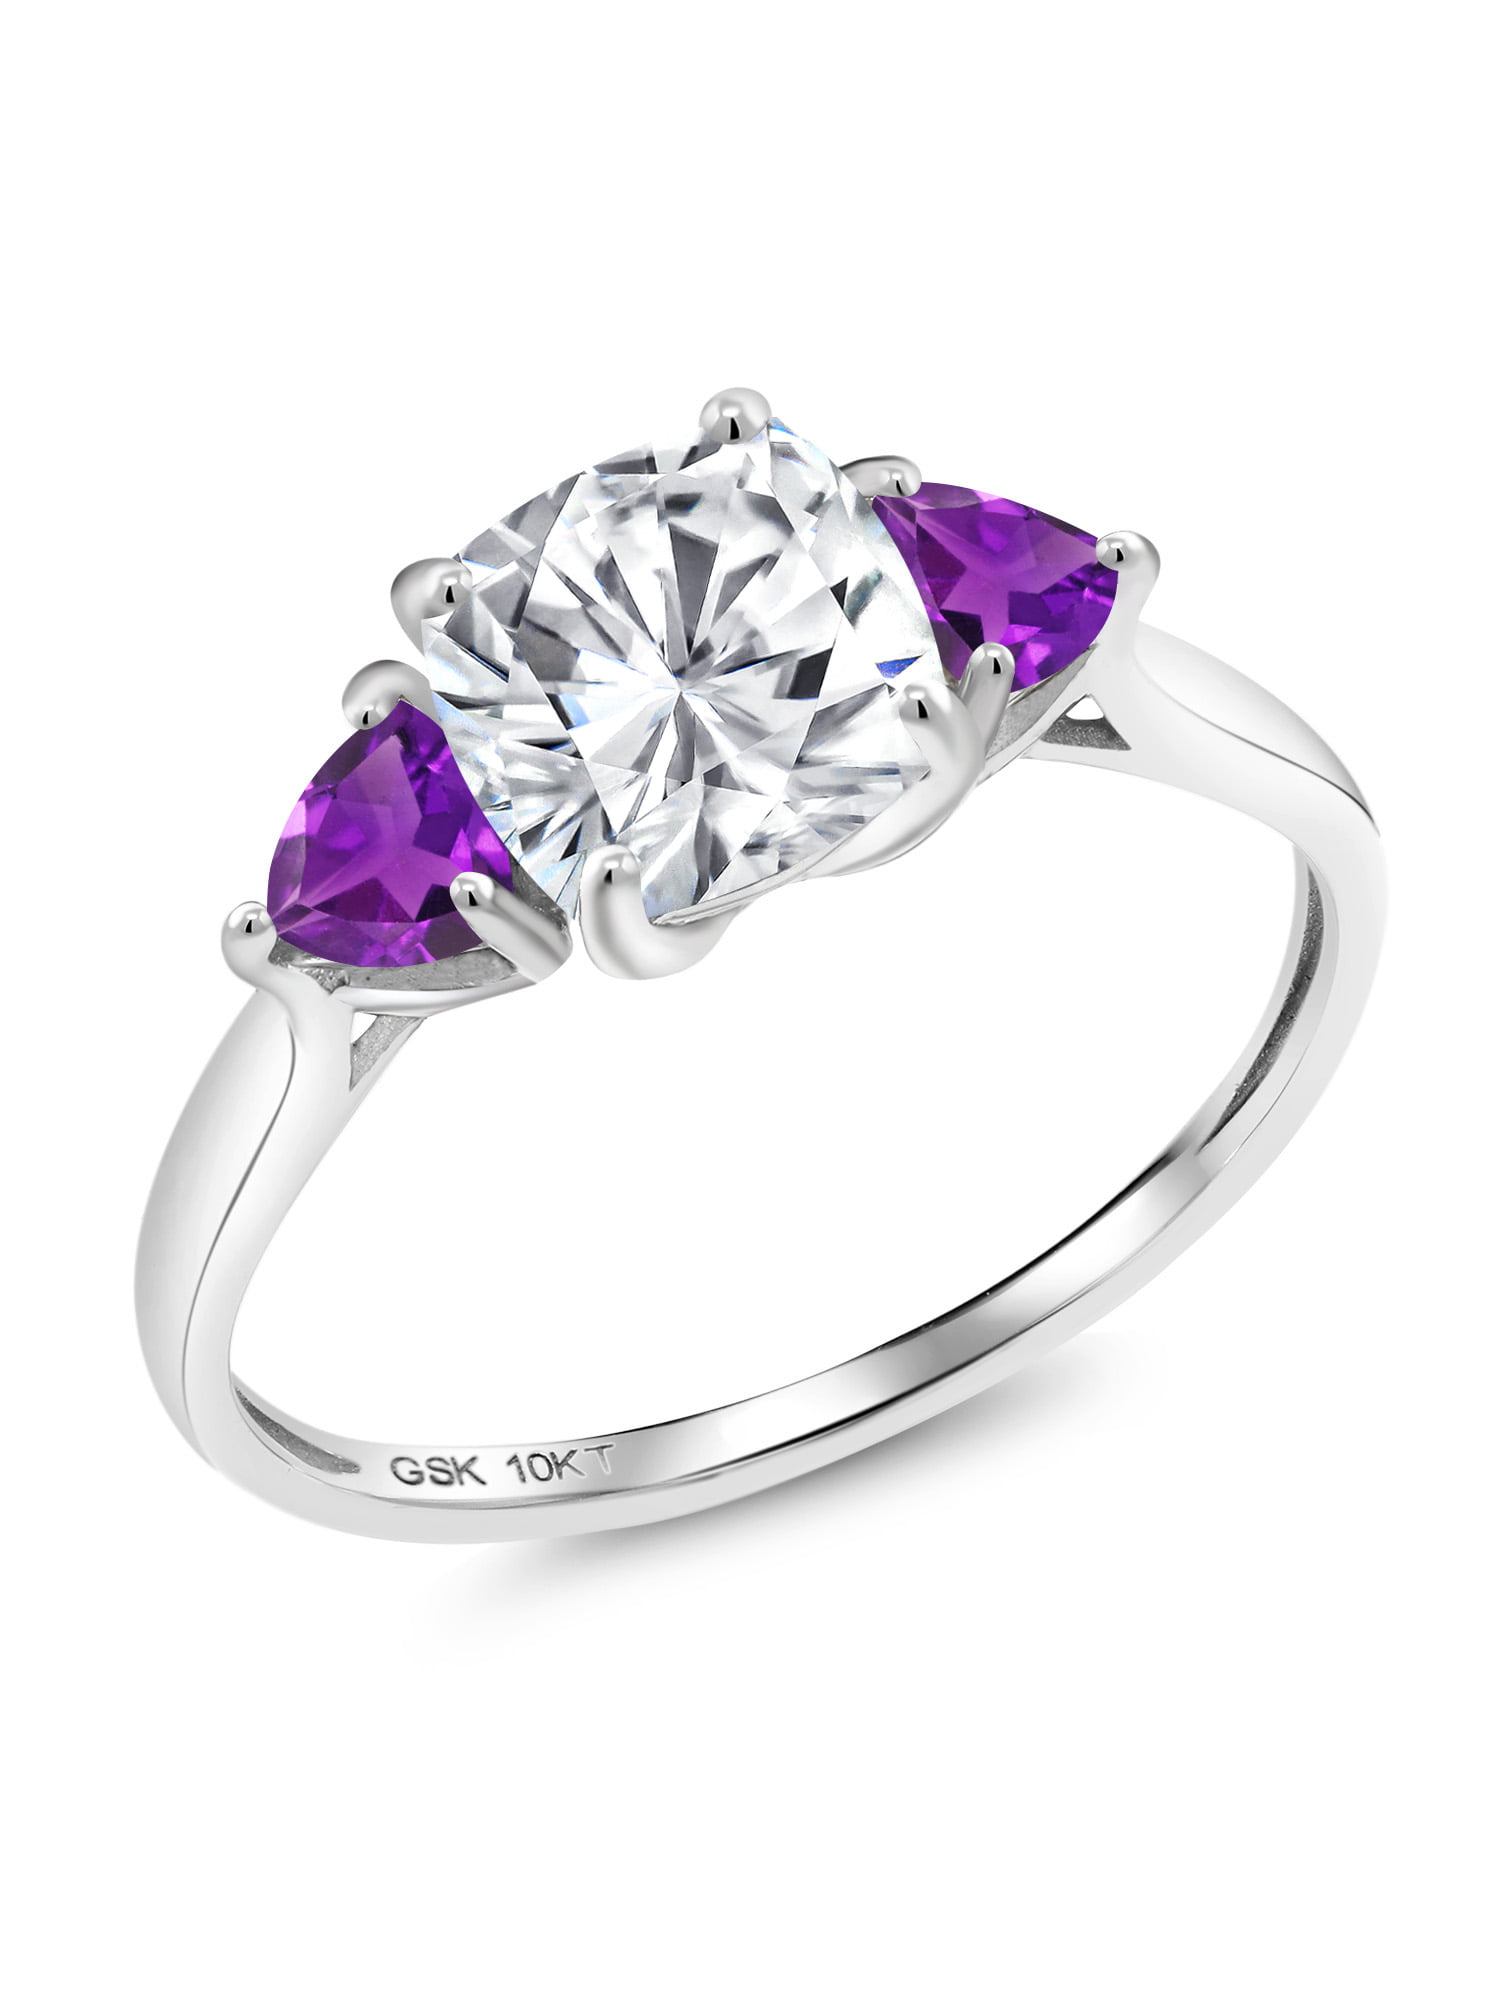 Details about   2.40 ct Round Halo Natural Amethyst Promise Bridal Wedding Ring 14k 2 tone Gold 